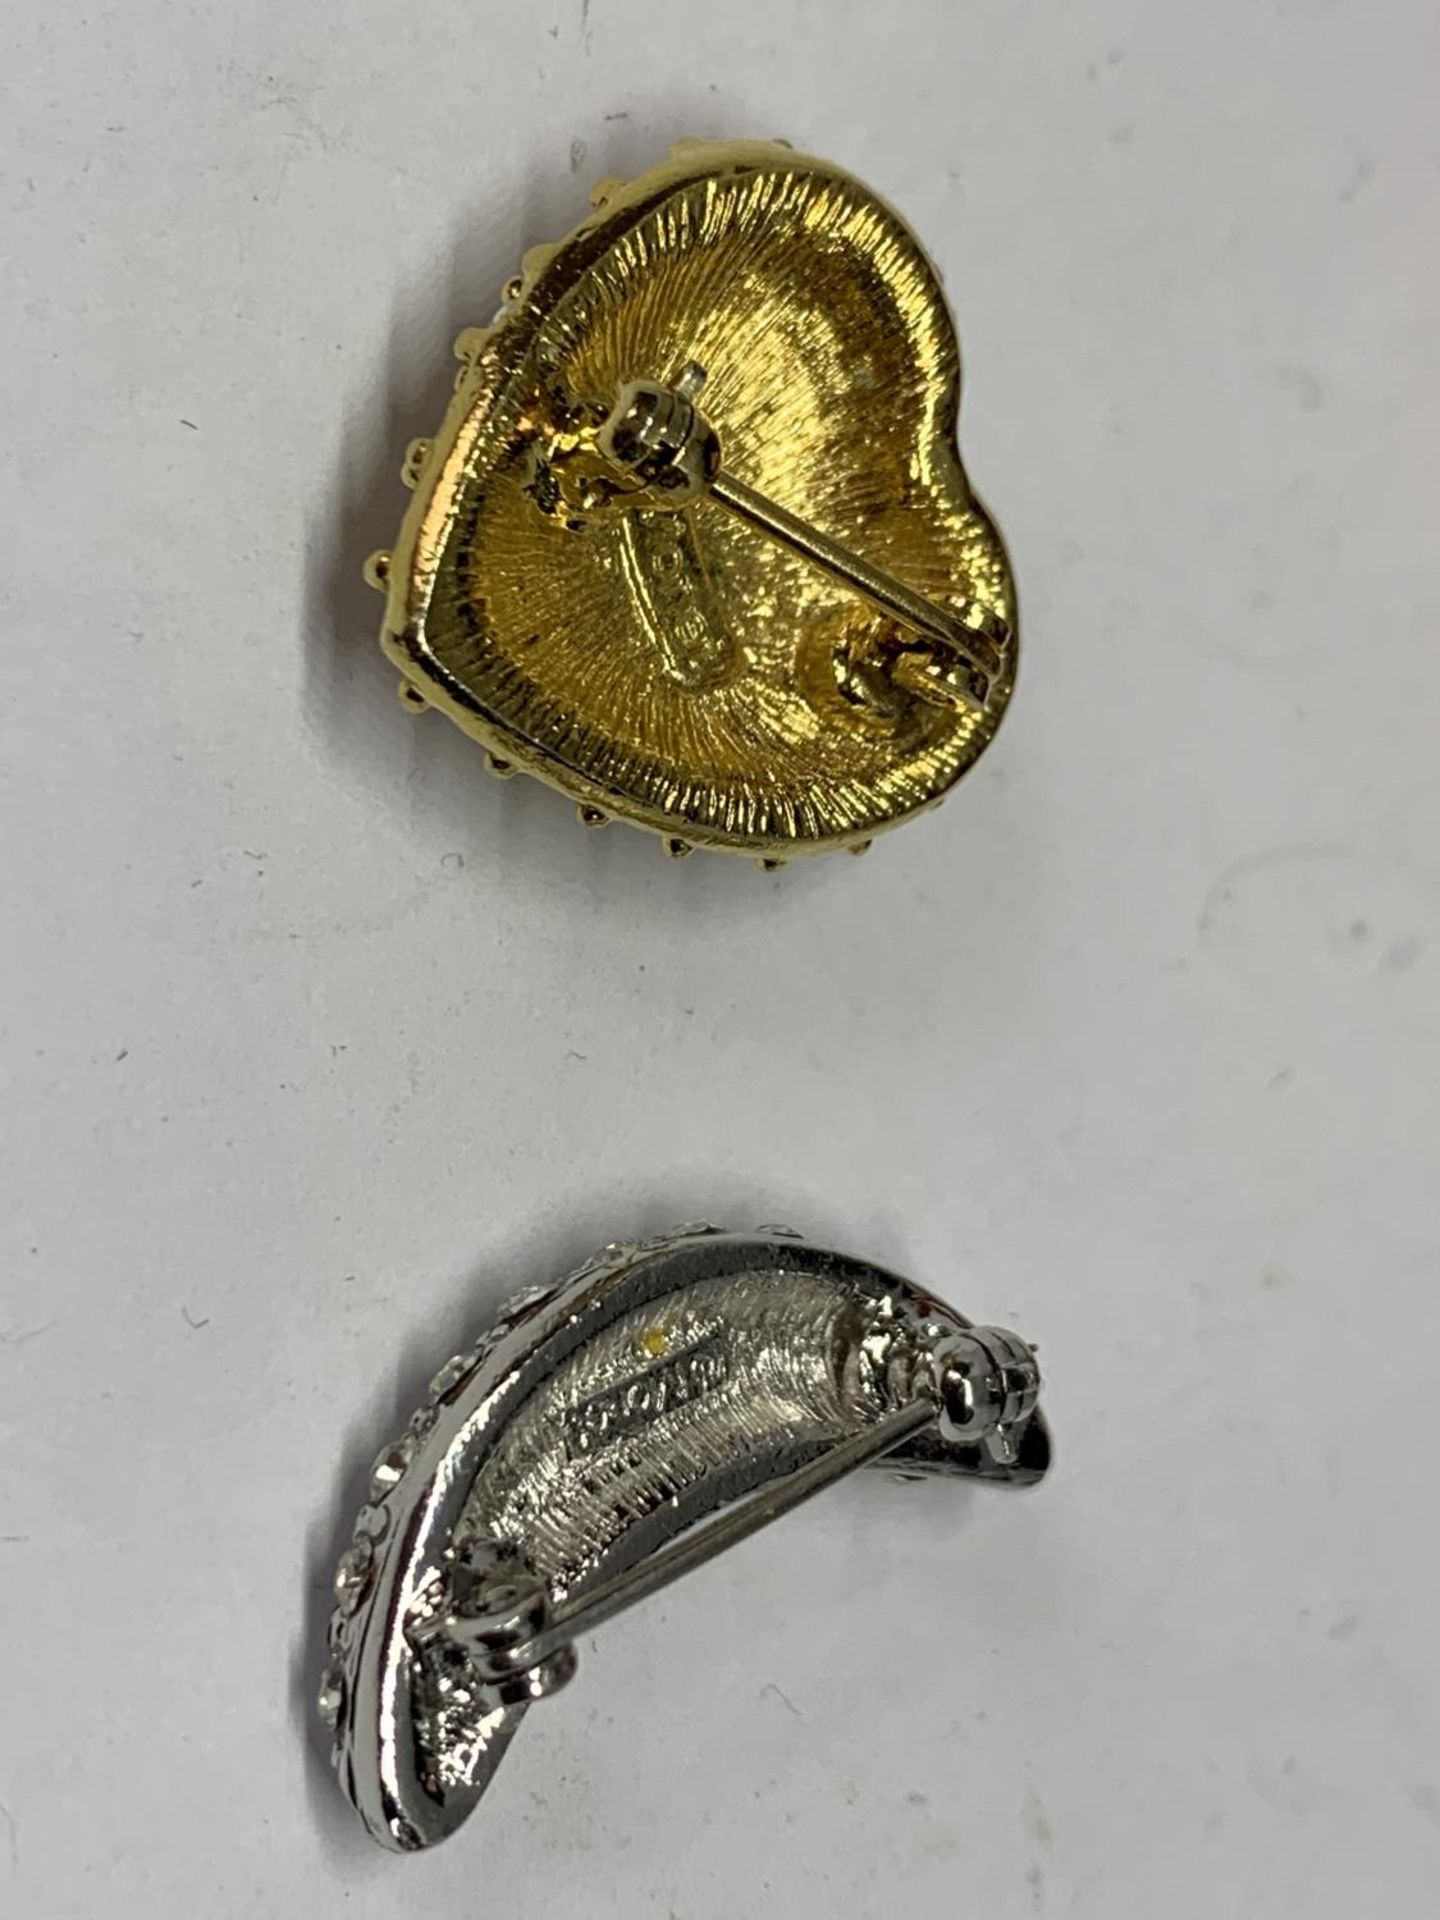 TWO BROOCHES, DIAMANTE ENCRUSTED IN THE FORM OF A YELLOW METAL HEART AND A WHITE METAL CRESCENT MOON - Image 2 of 3